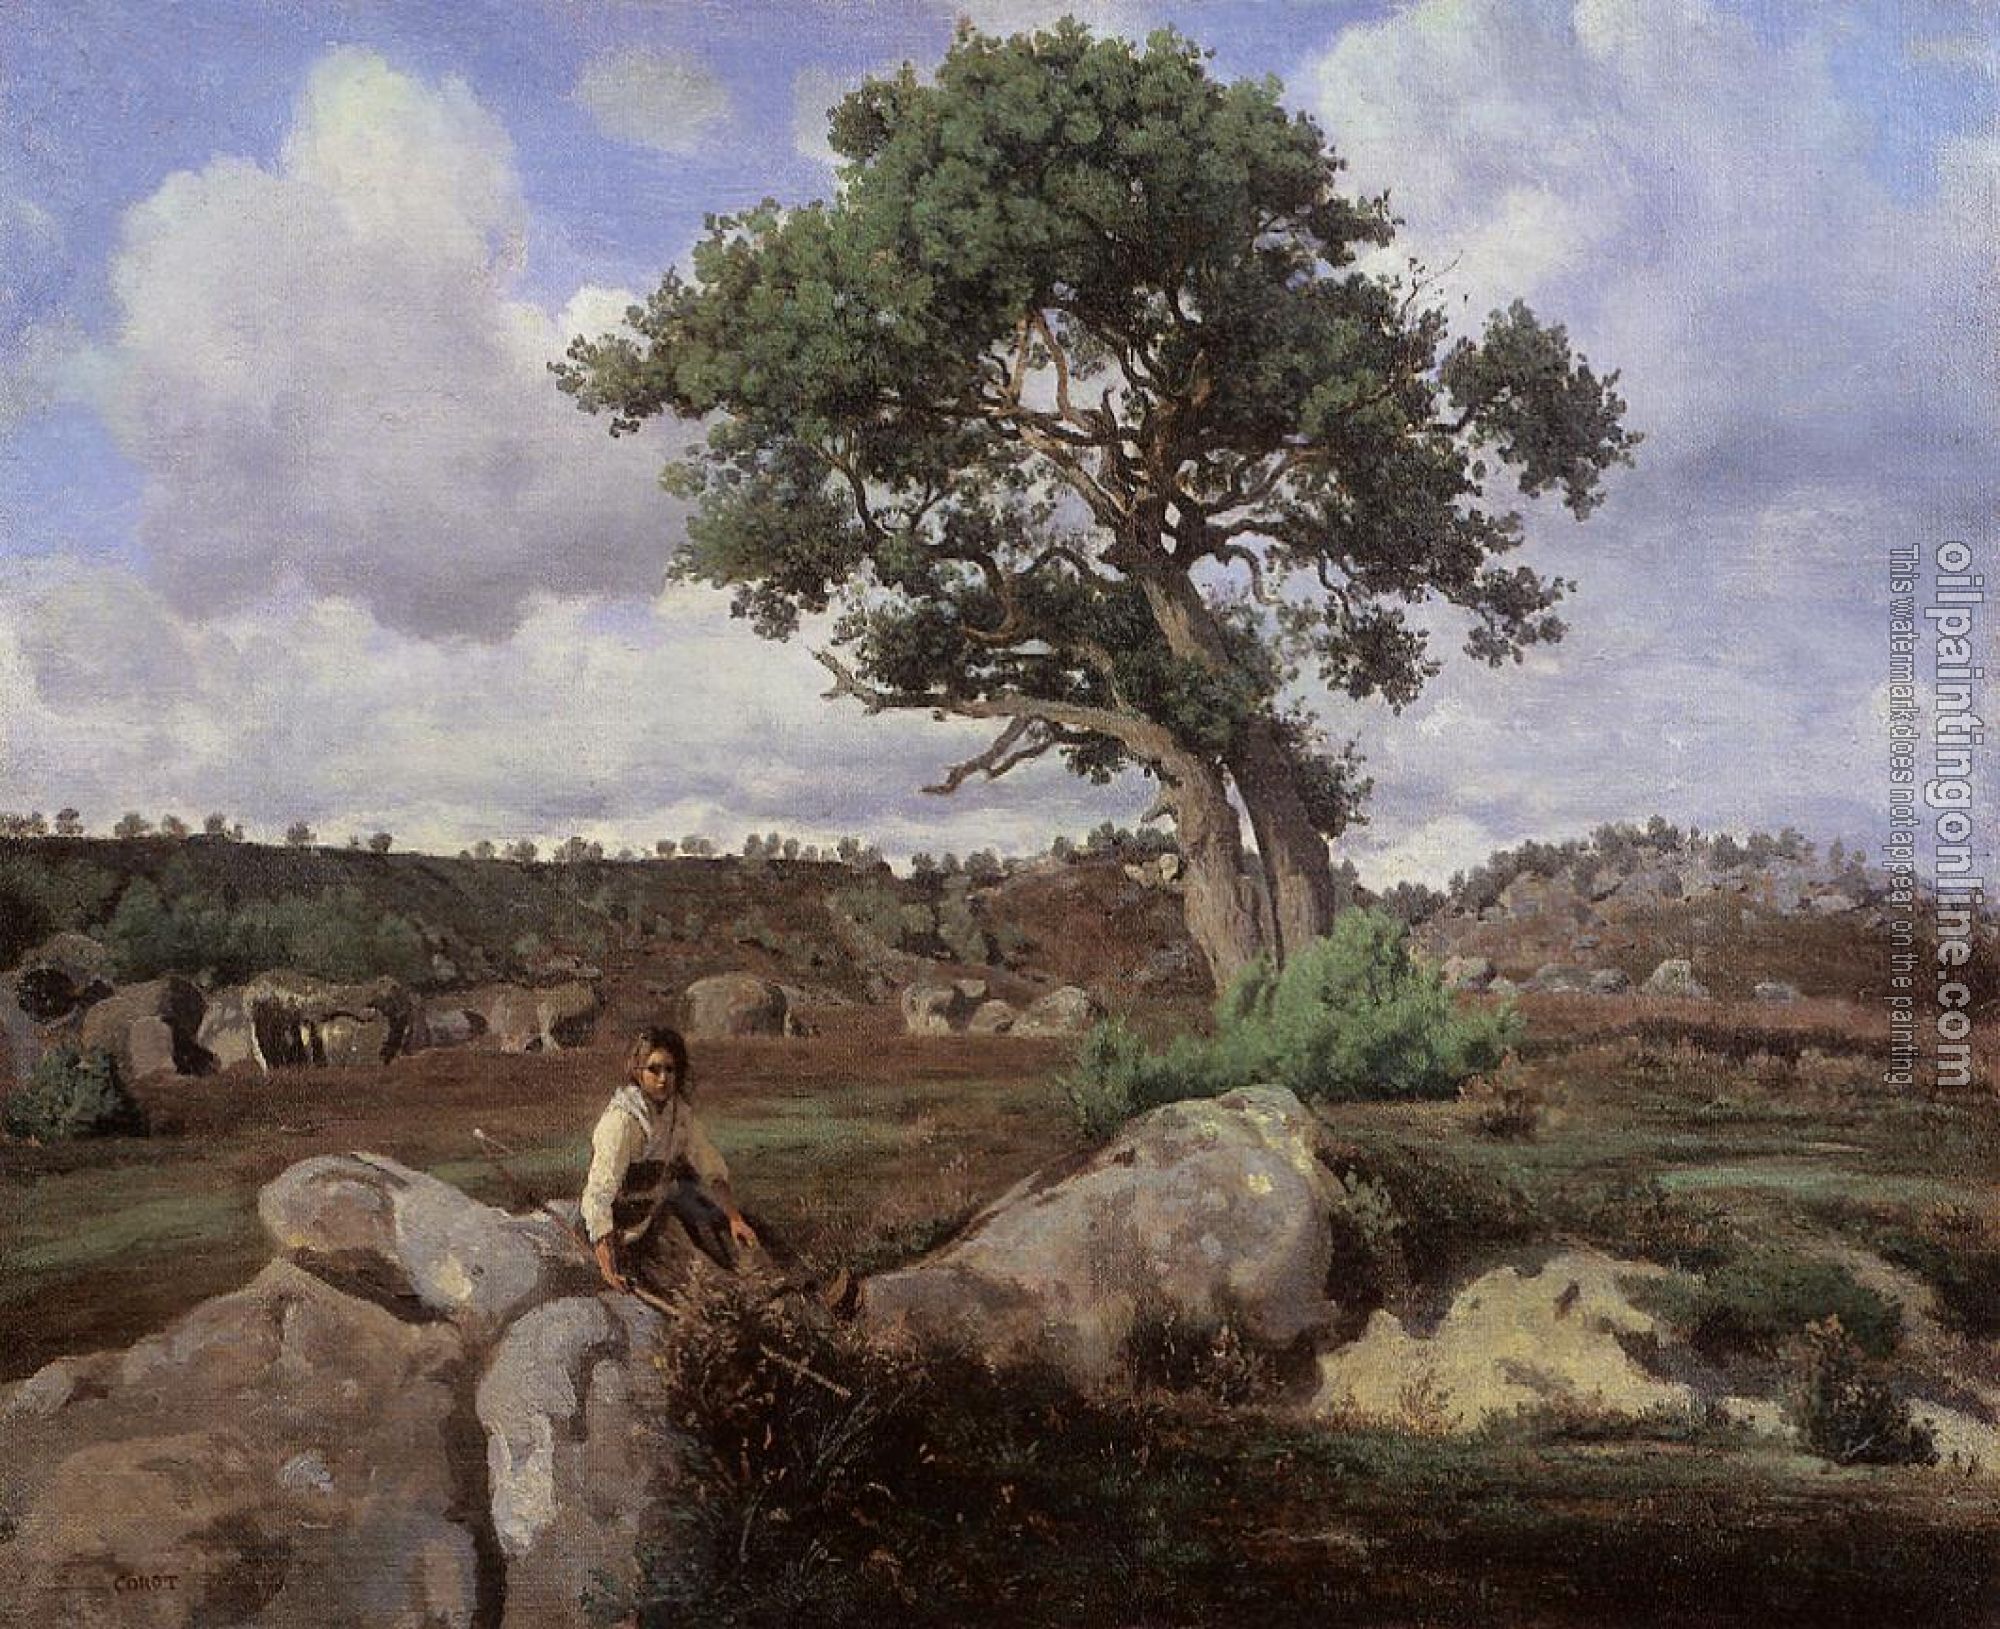 Corot, Jean-Baptiste-Camille - Fontainebleau, 'The Raging One'